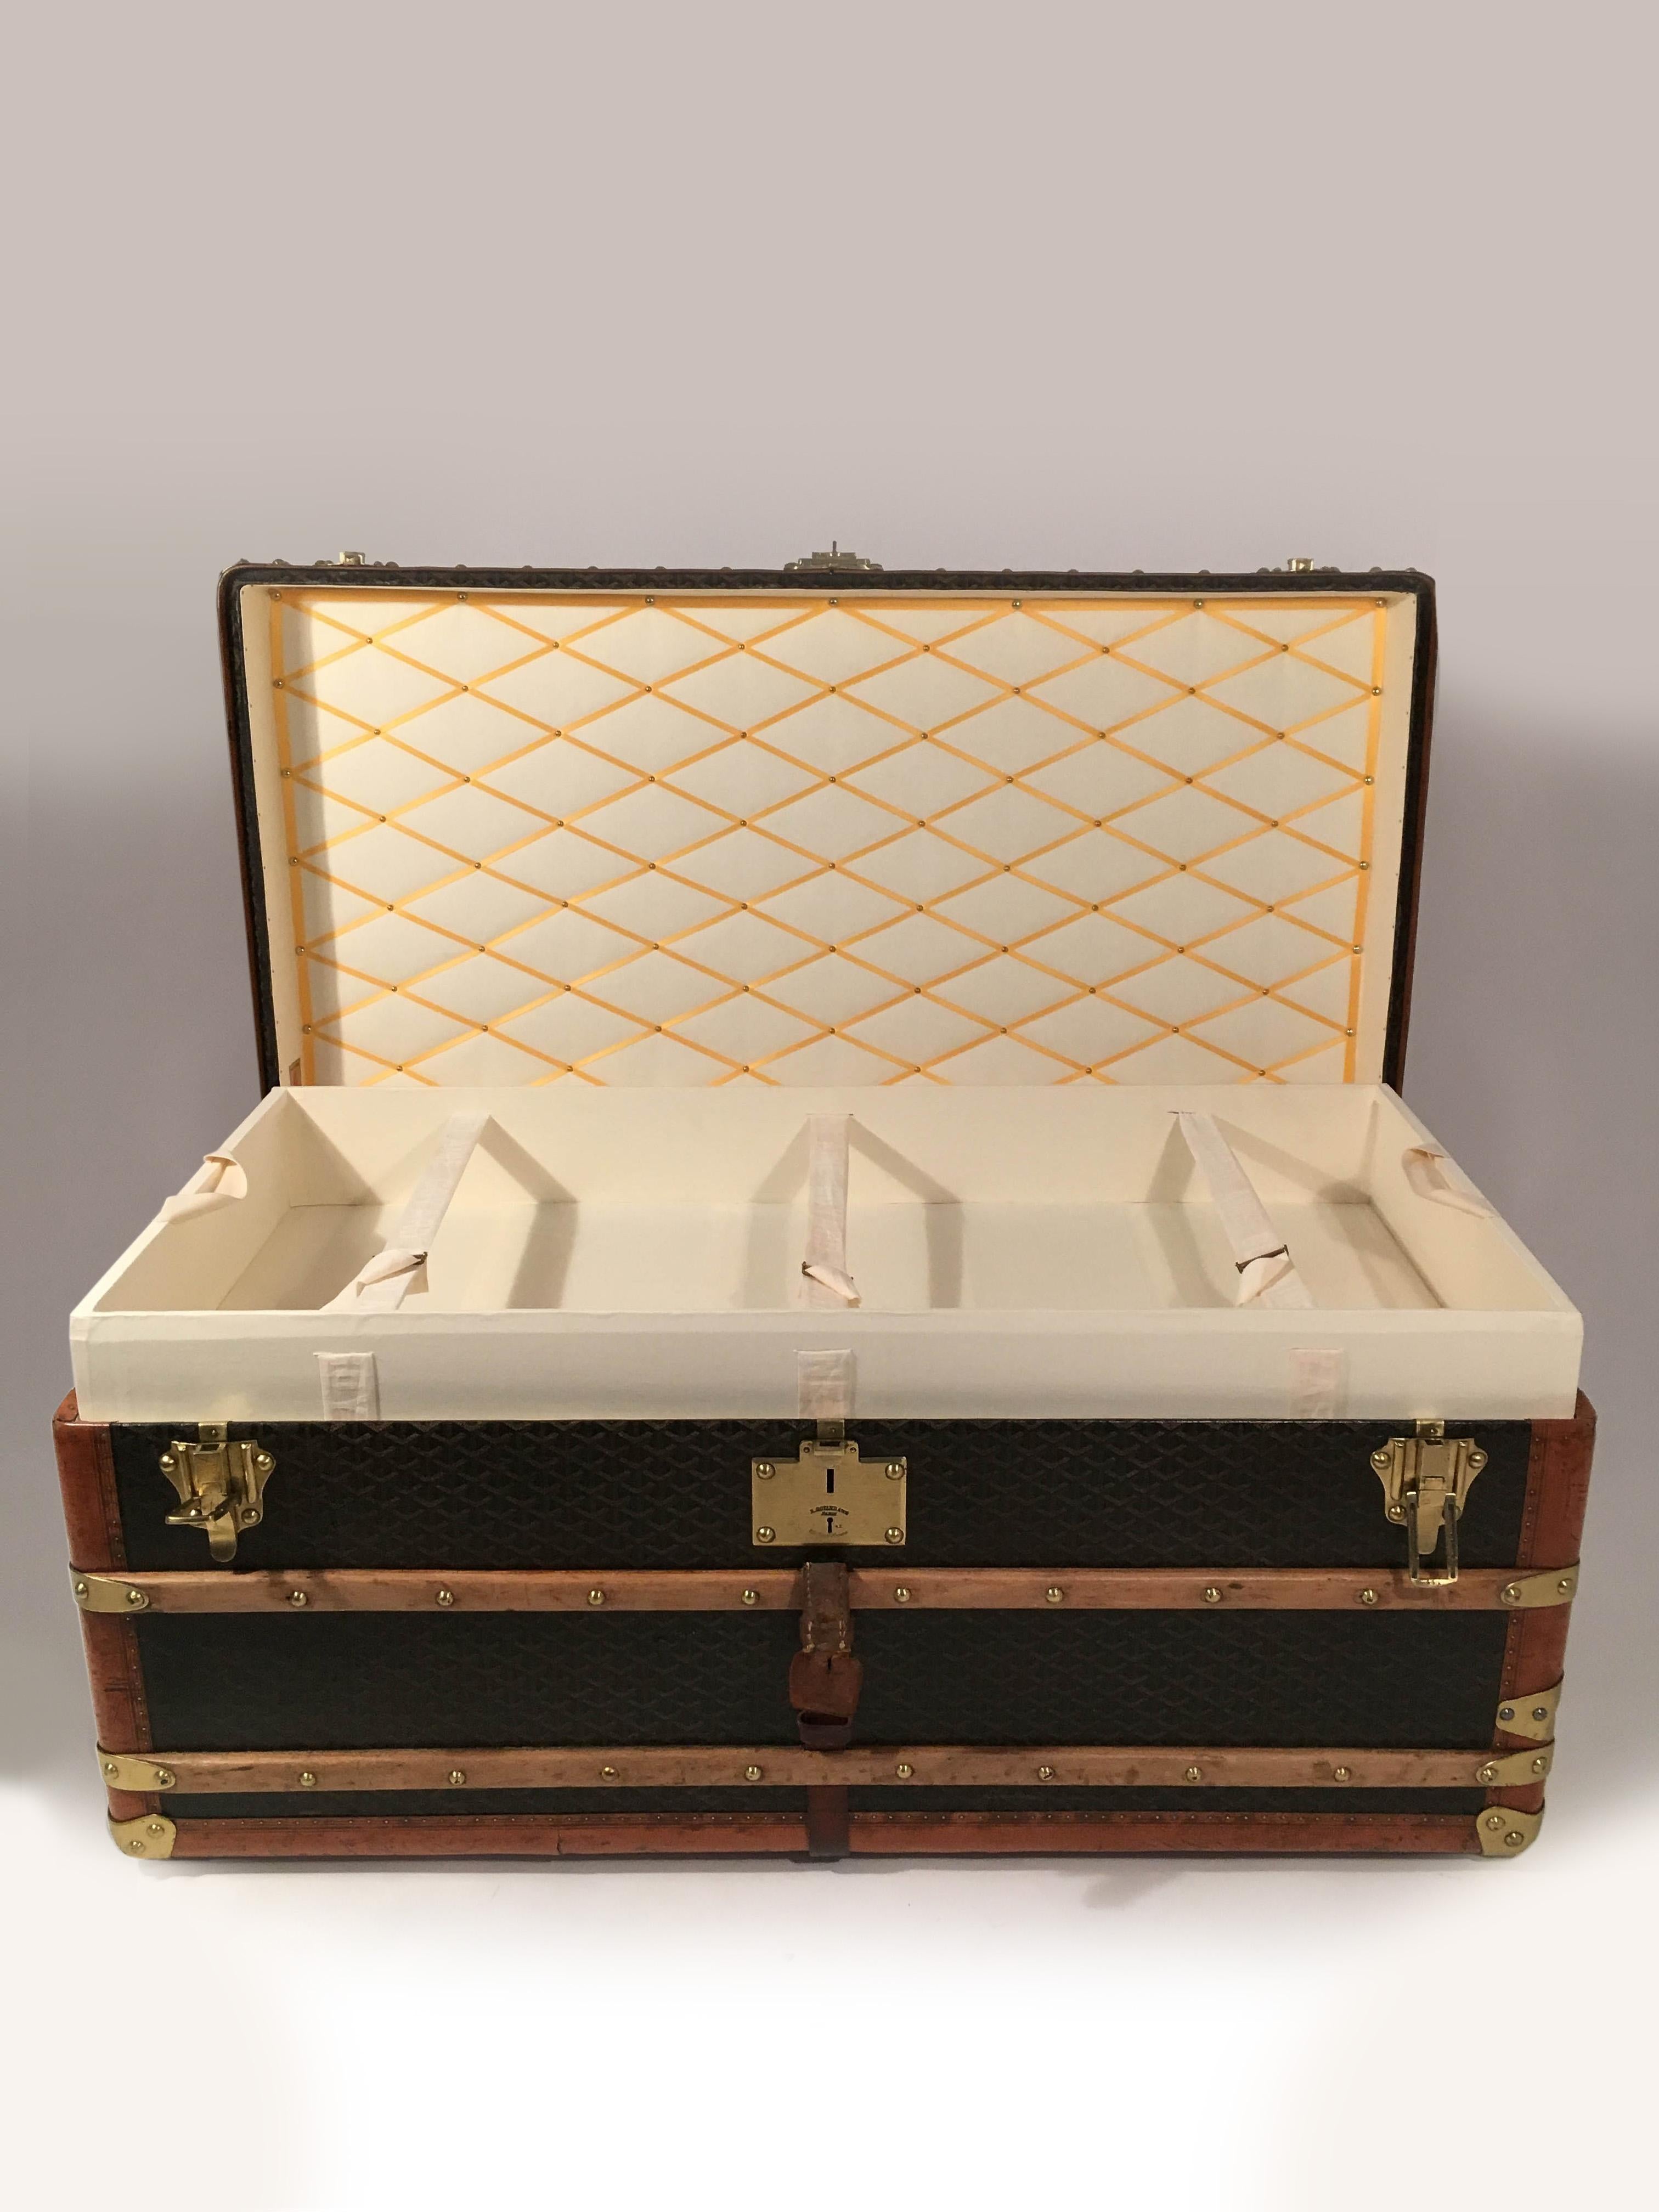 Brass Goyard Steamer Trunk from the Princely House of Thurn and Taxis, France 1910s